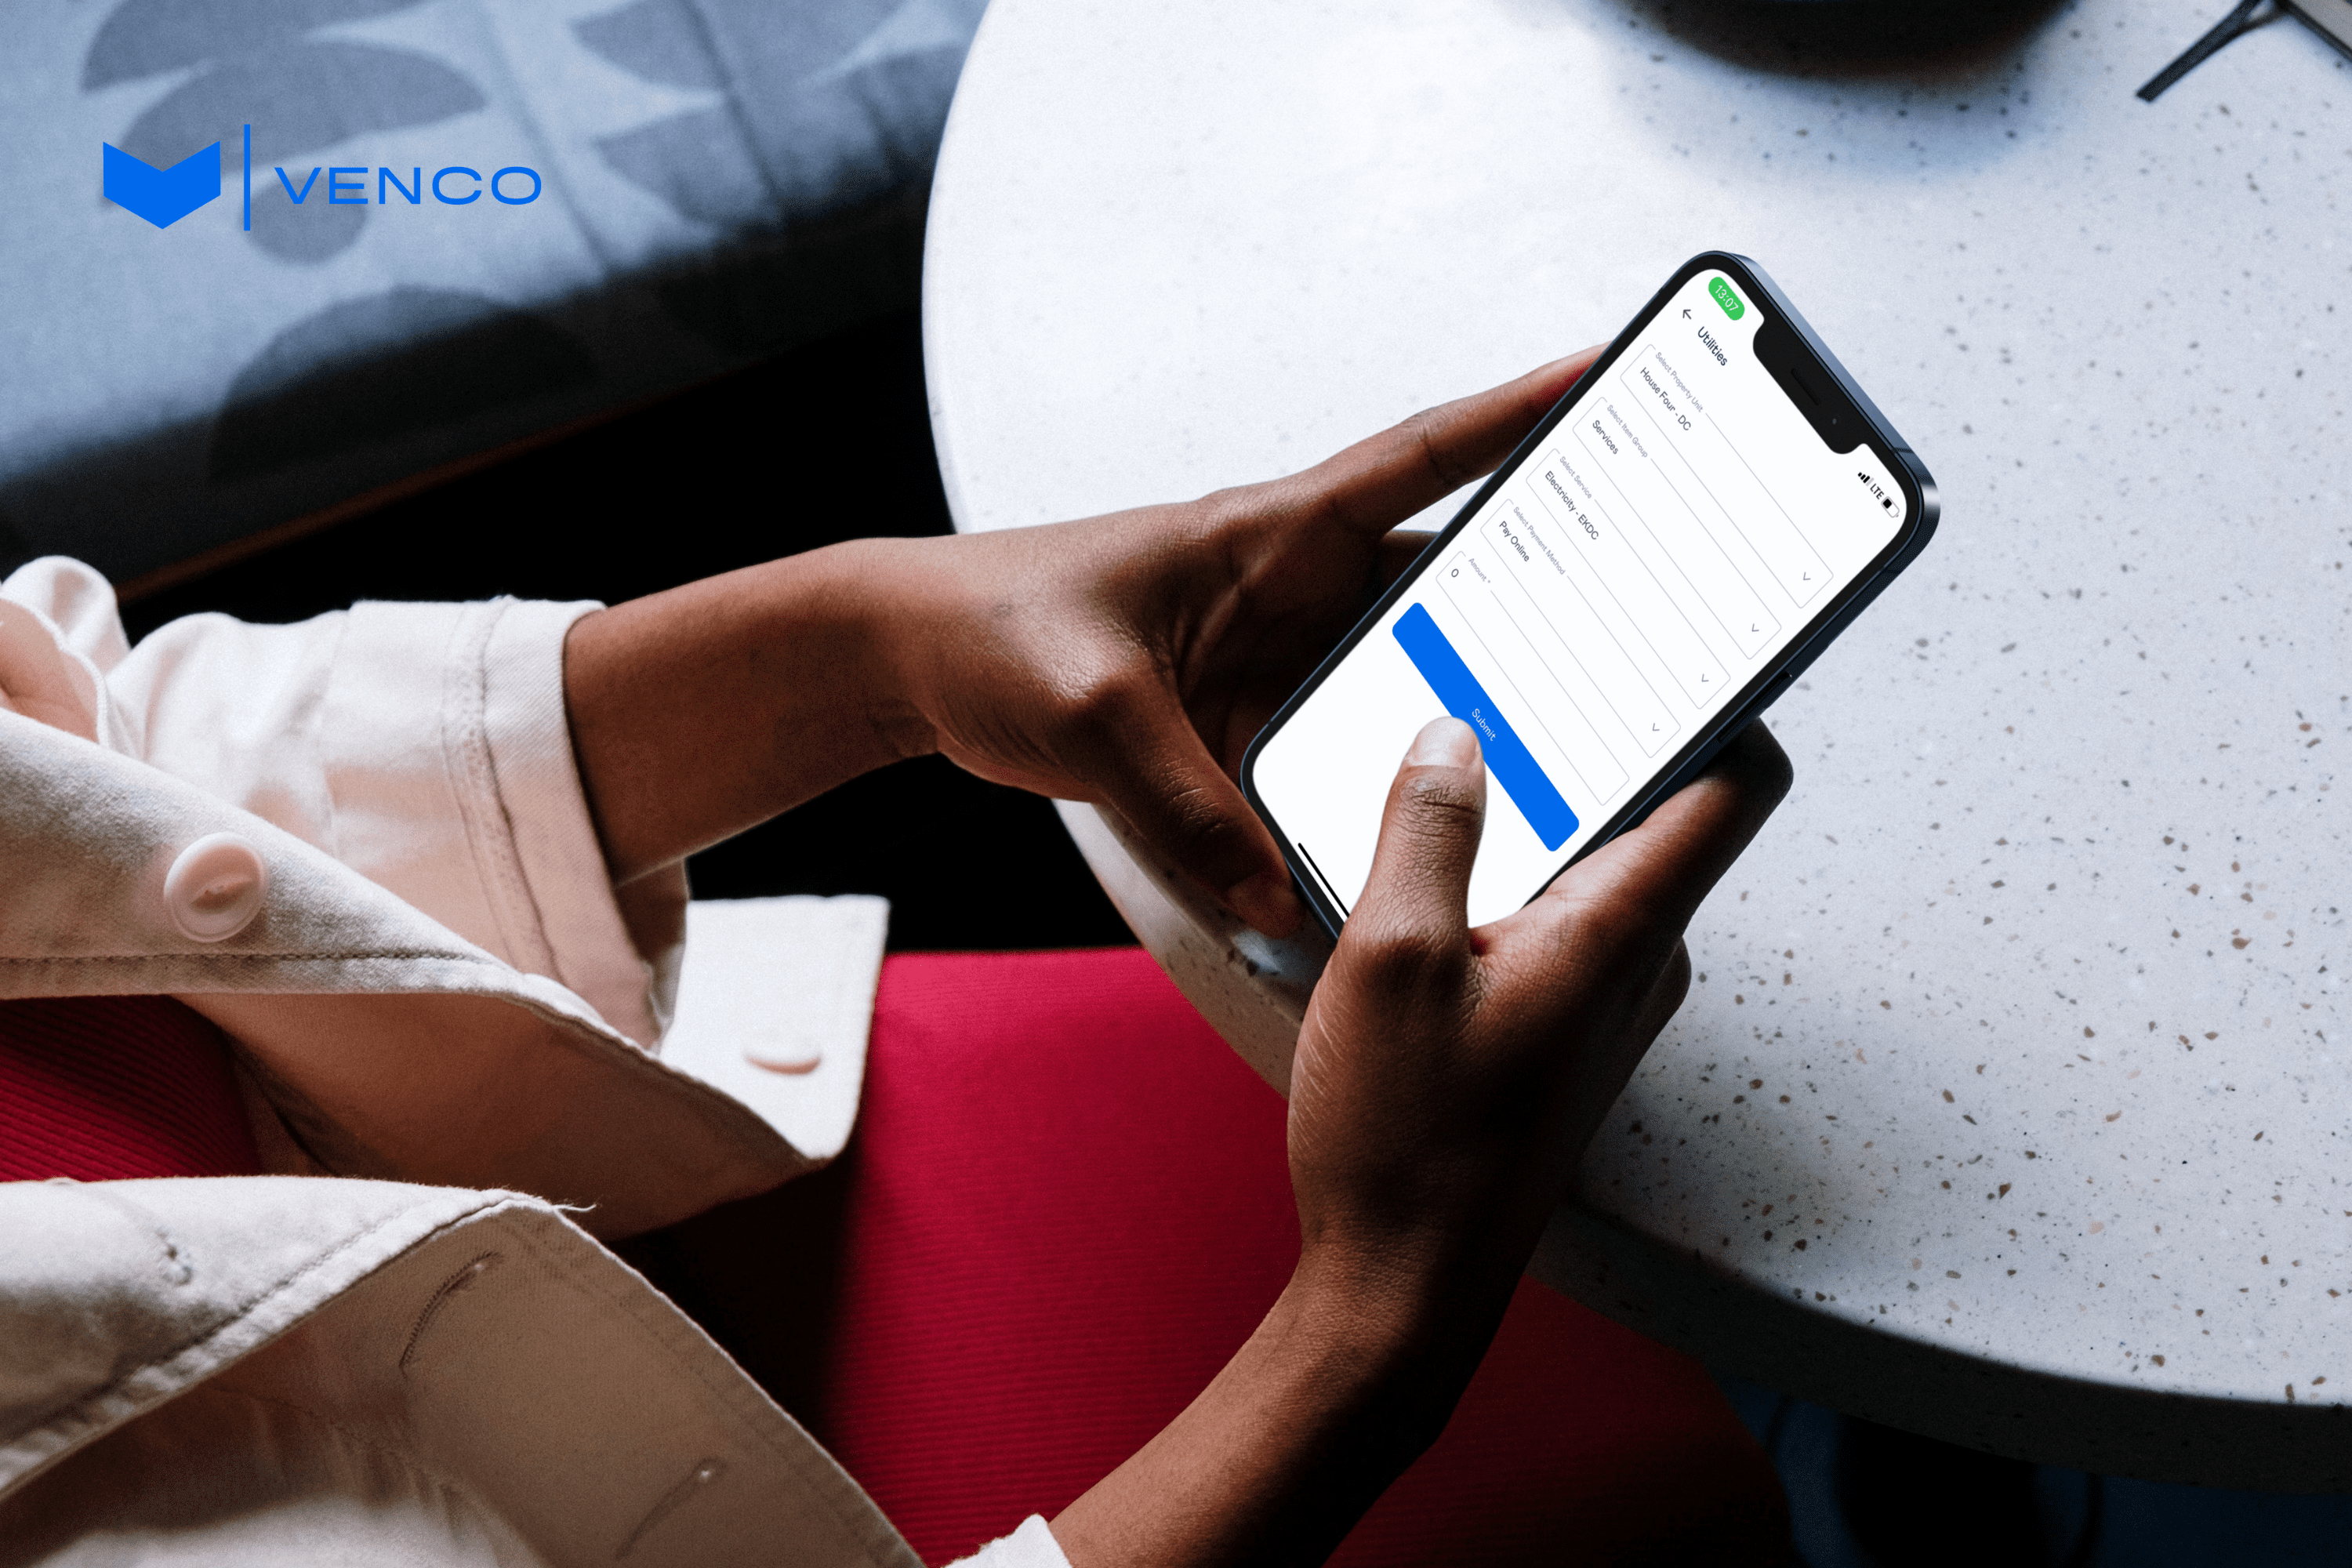 VENCO secures $670,000 pre-seed funding to deliver digital solutions that enhance the living experience in Africa.